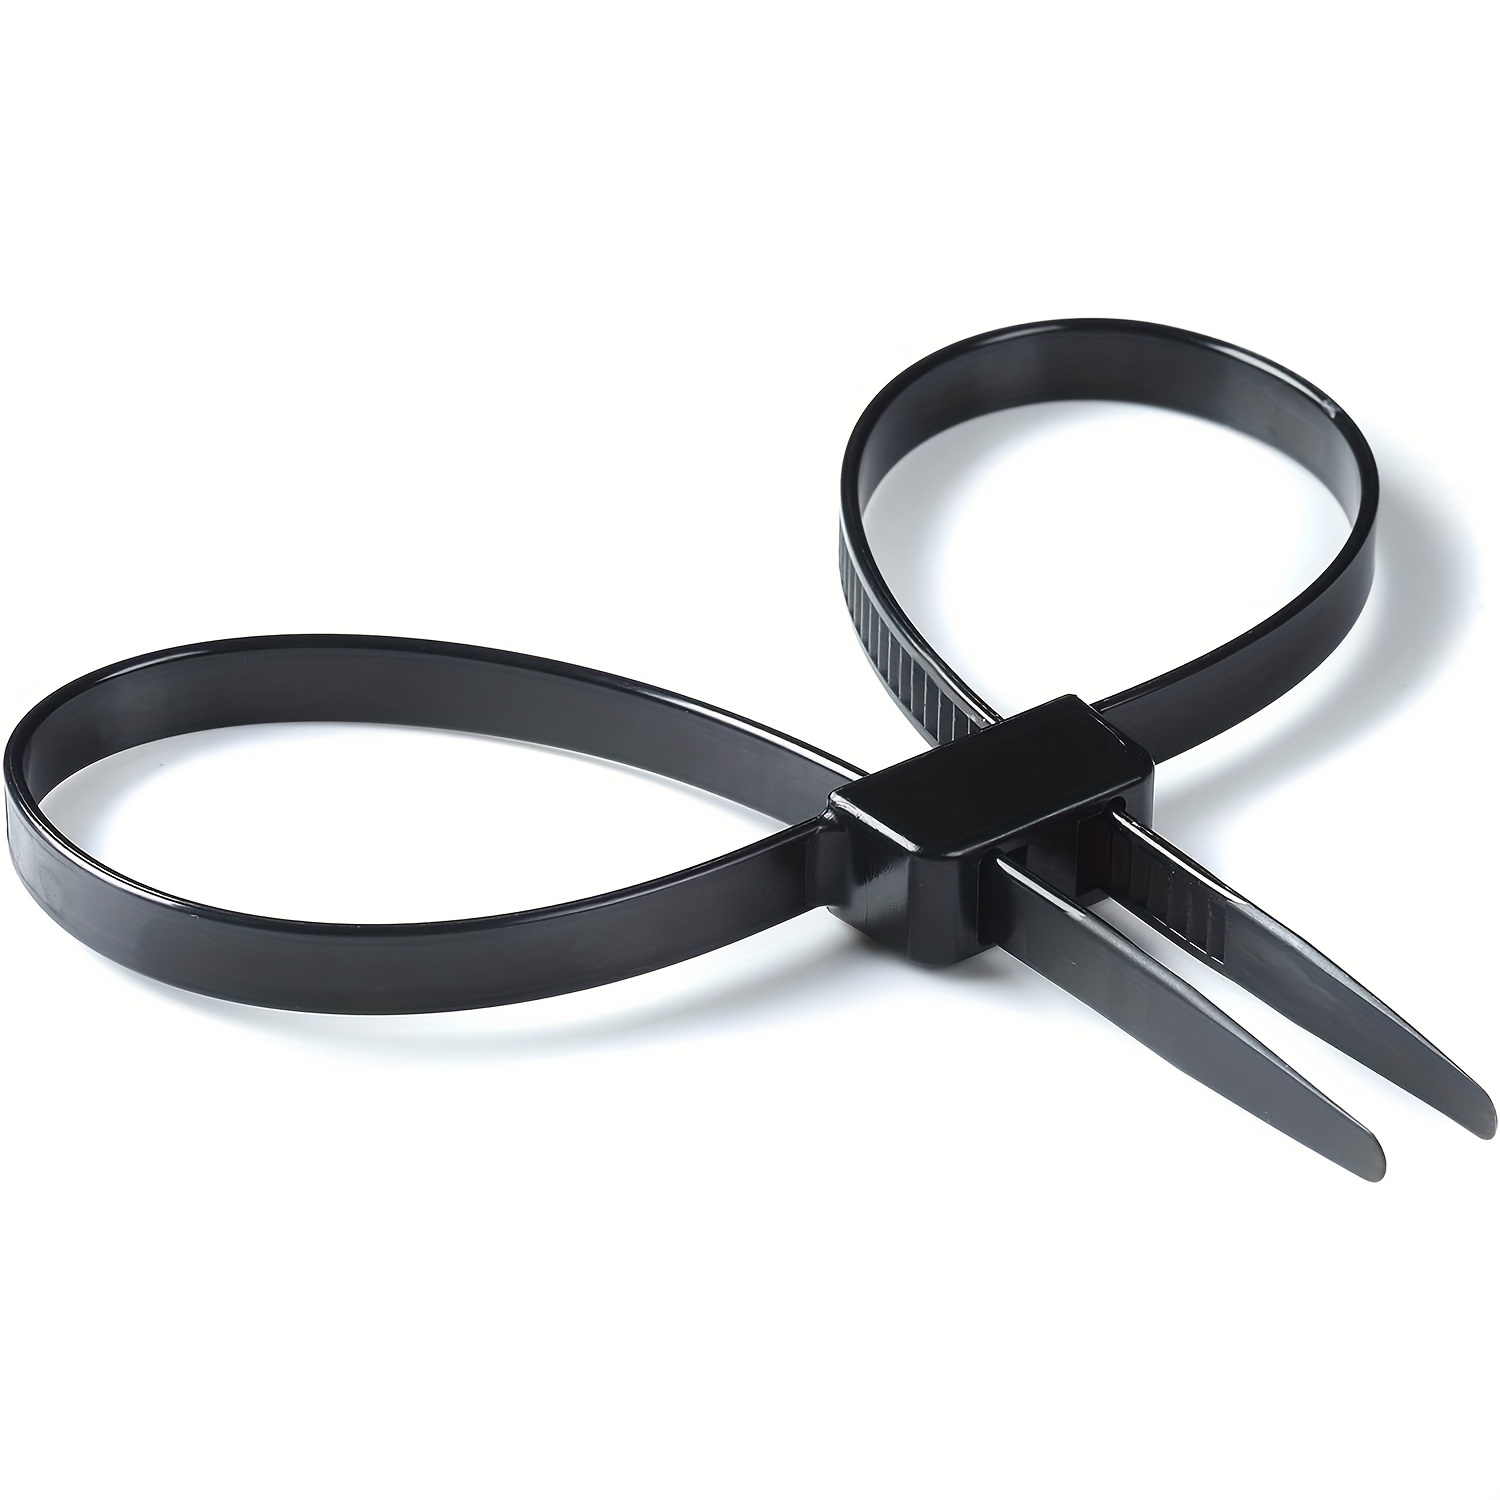 

2pcs Heavy Duty Strong Zip Tie Handcuffs Nylon Double Locking Cuffs Black Plastic Cable Ties, 250-lbs Tensile Strength